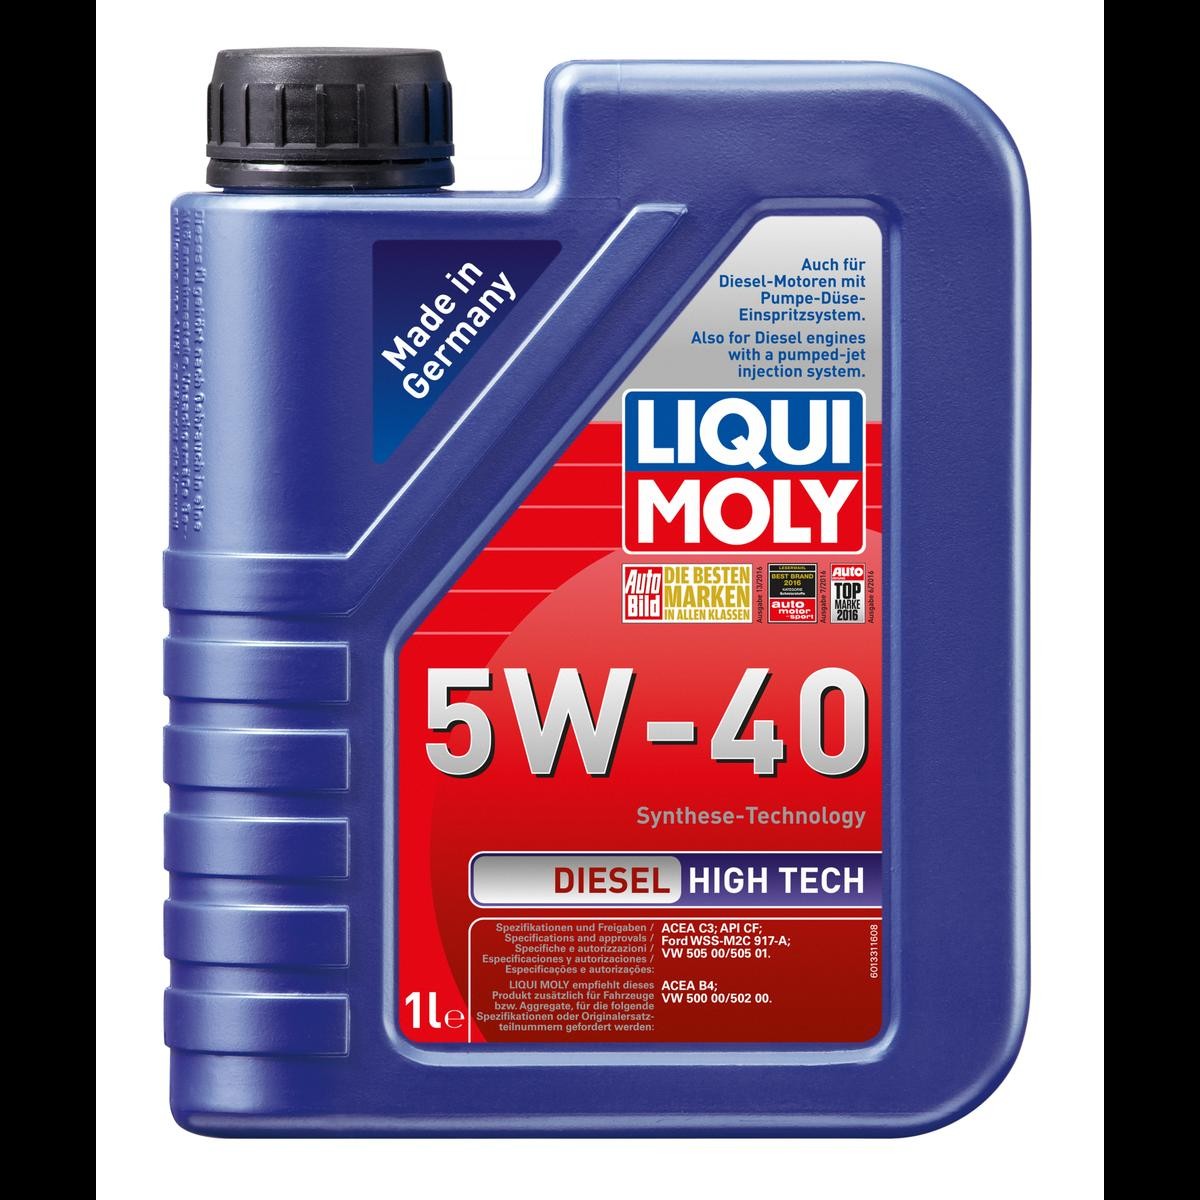 LIQUI MOLY Diesel, High Tech 1331 Engine oil 5W-40, 1l, Part Synthetic Oil